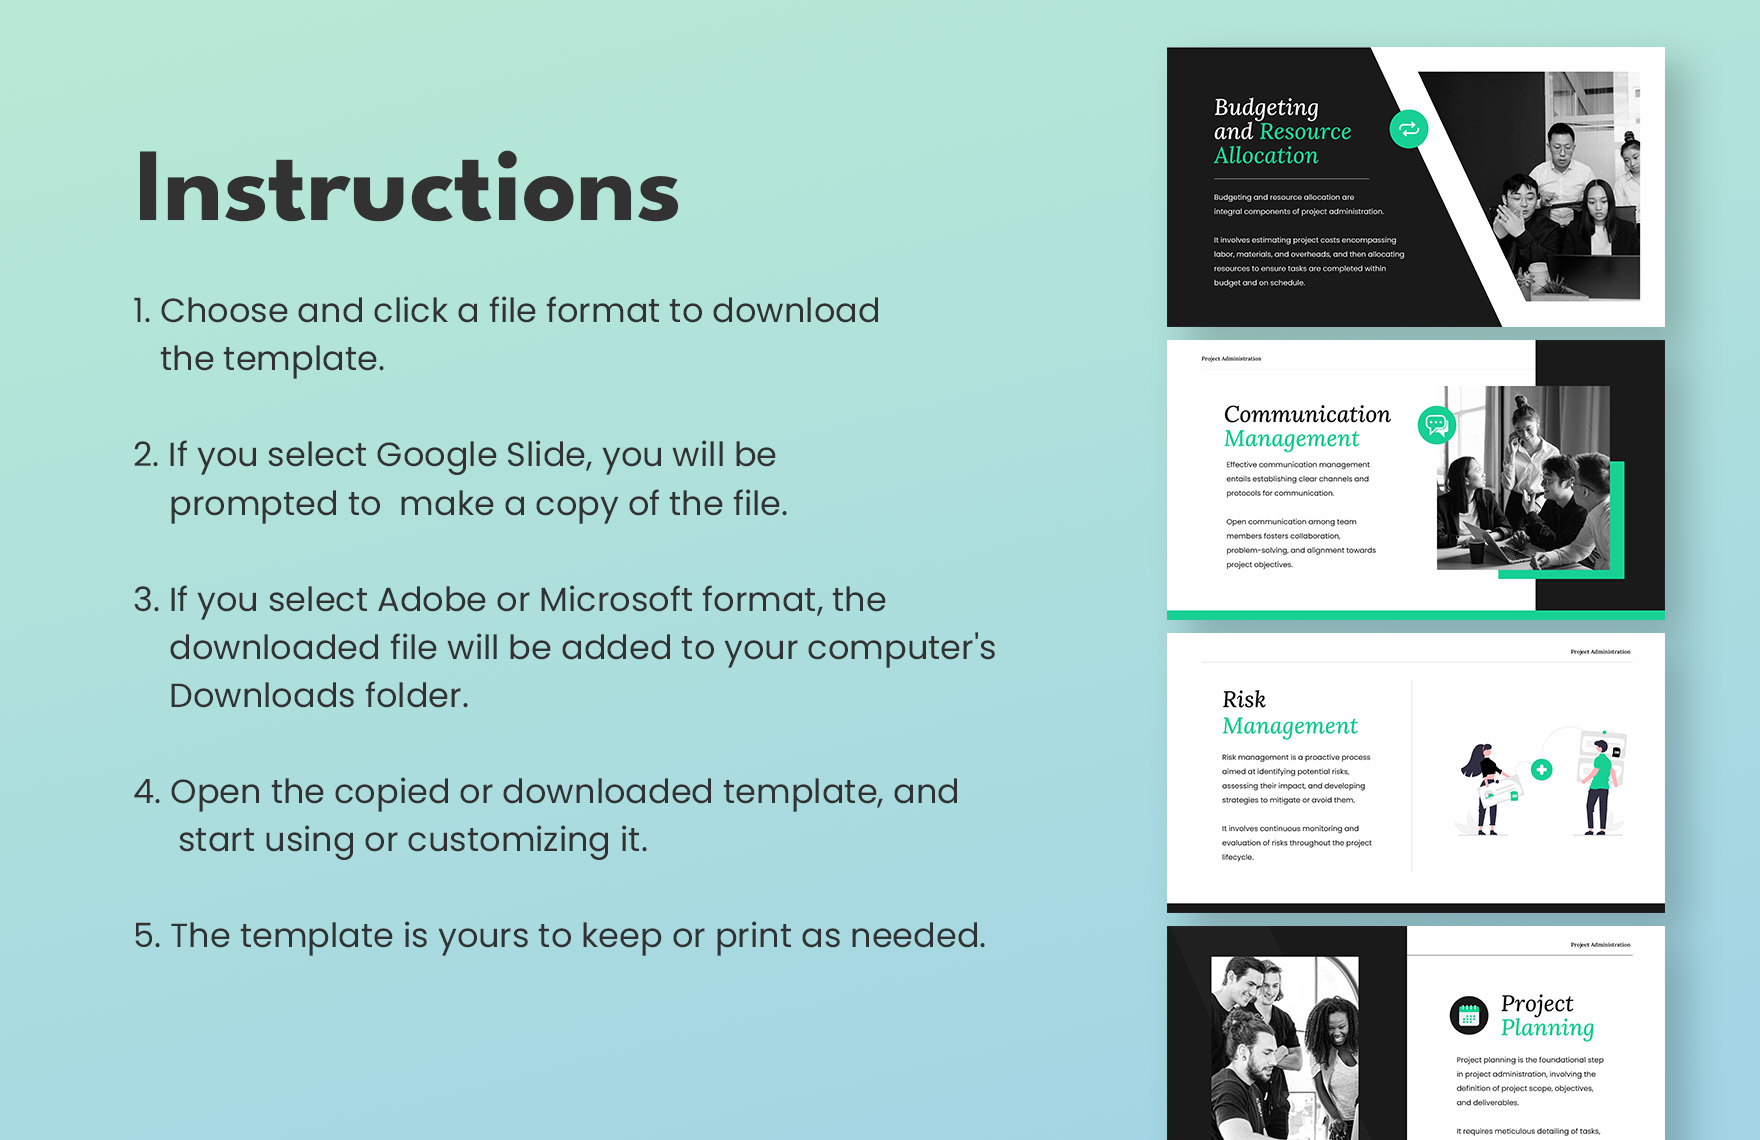 Project Administration Template